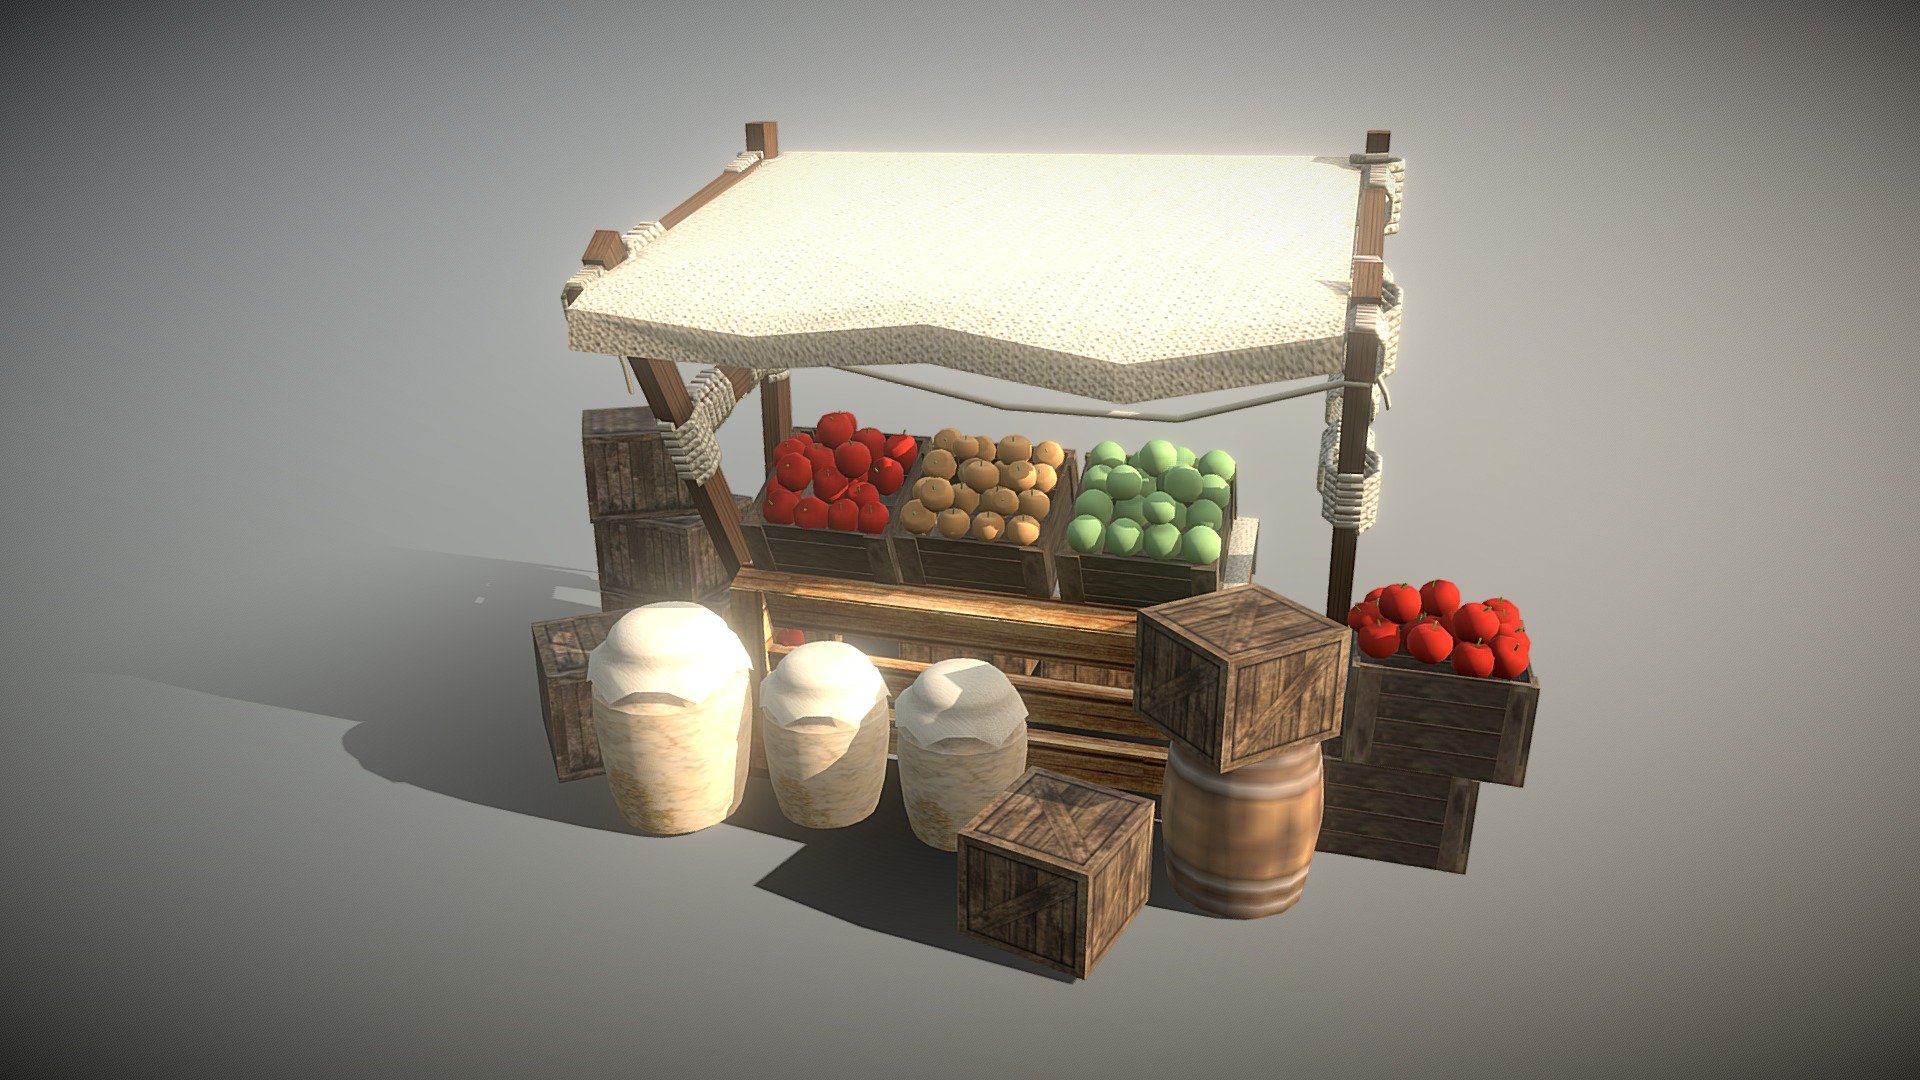 Medieval Shop Set Modeling !!
I made this shop for set modeling, Scene modeling and In medieval environment scene or medieval market scene.
You can download it with textures in zip file use it in Game engine.
Hope you like it! 
Please Follow me and leave a comment.
Email : imdan1995@gmail.com
Facebook id : Daniel Naidu.
Instagram Id : @3danielart - Medieval Shop set Modeling - Buy Royalty Free 3D model by Dinesh Naidu (@Dinesh_TS) 3d model